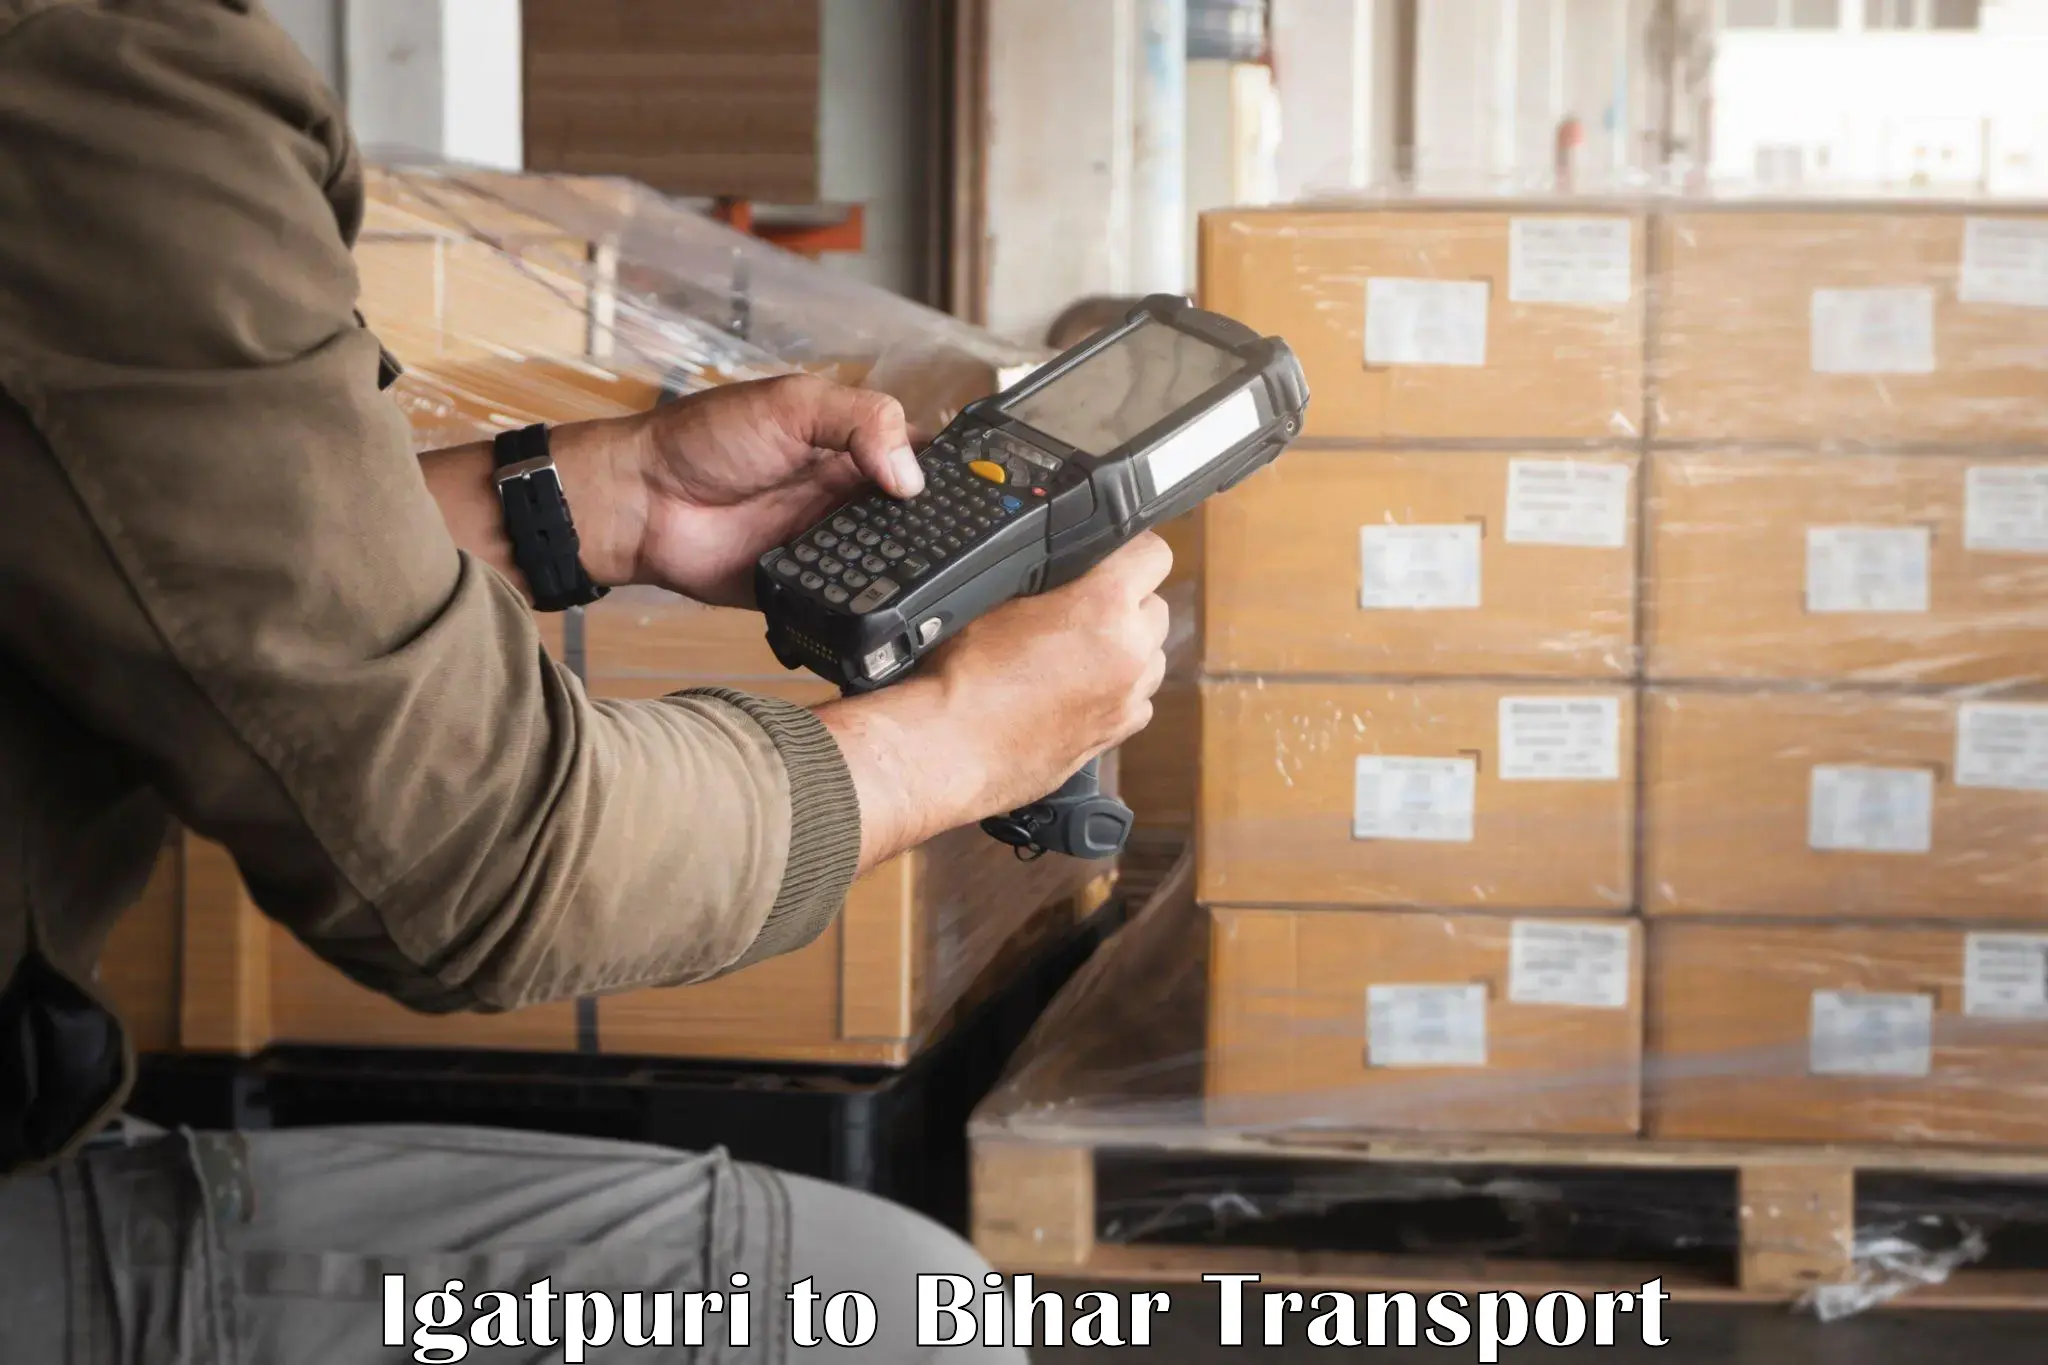 Shipping services in Igatpuri to Katihar